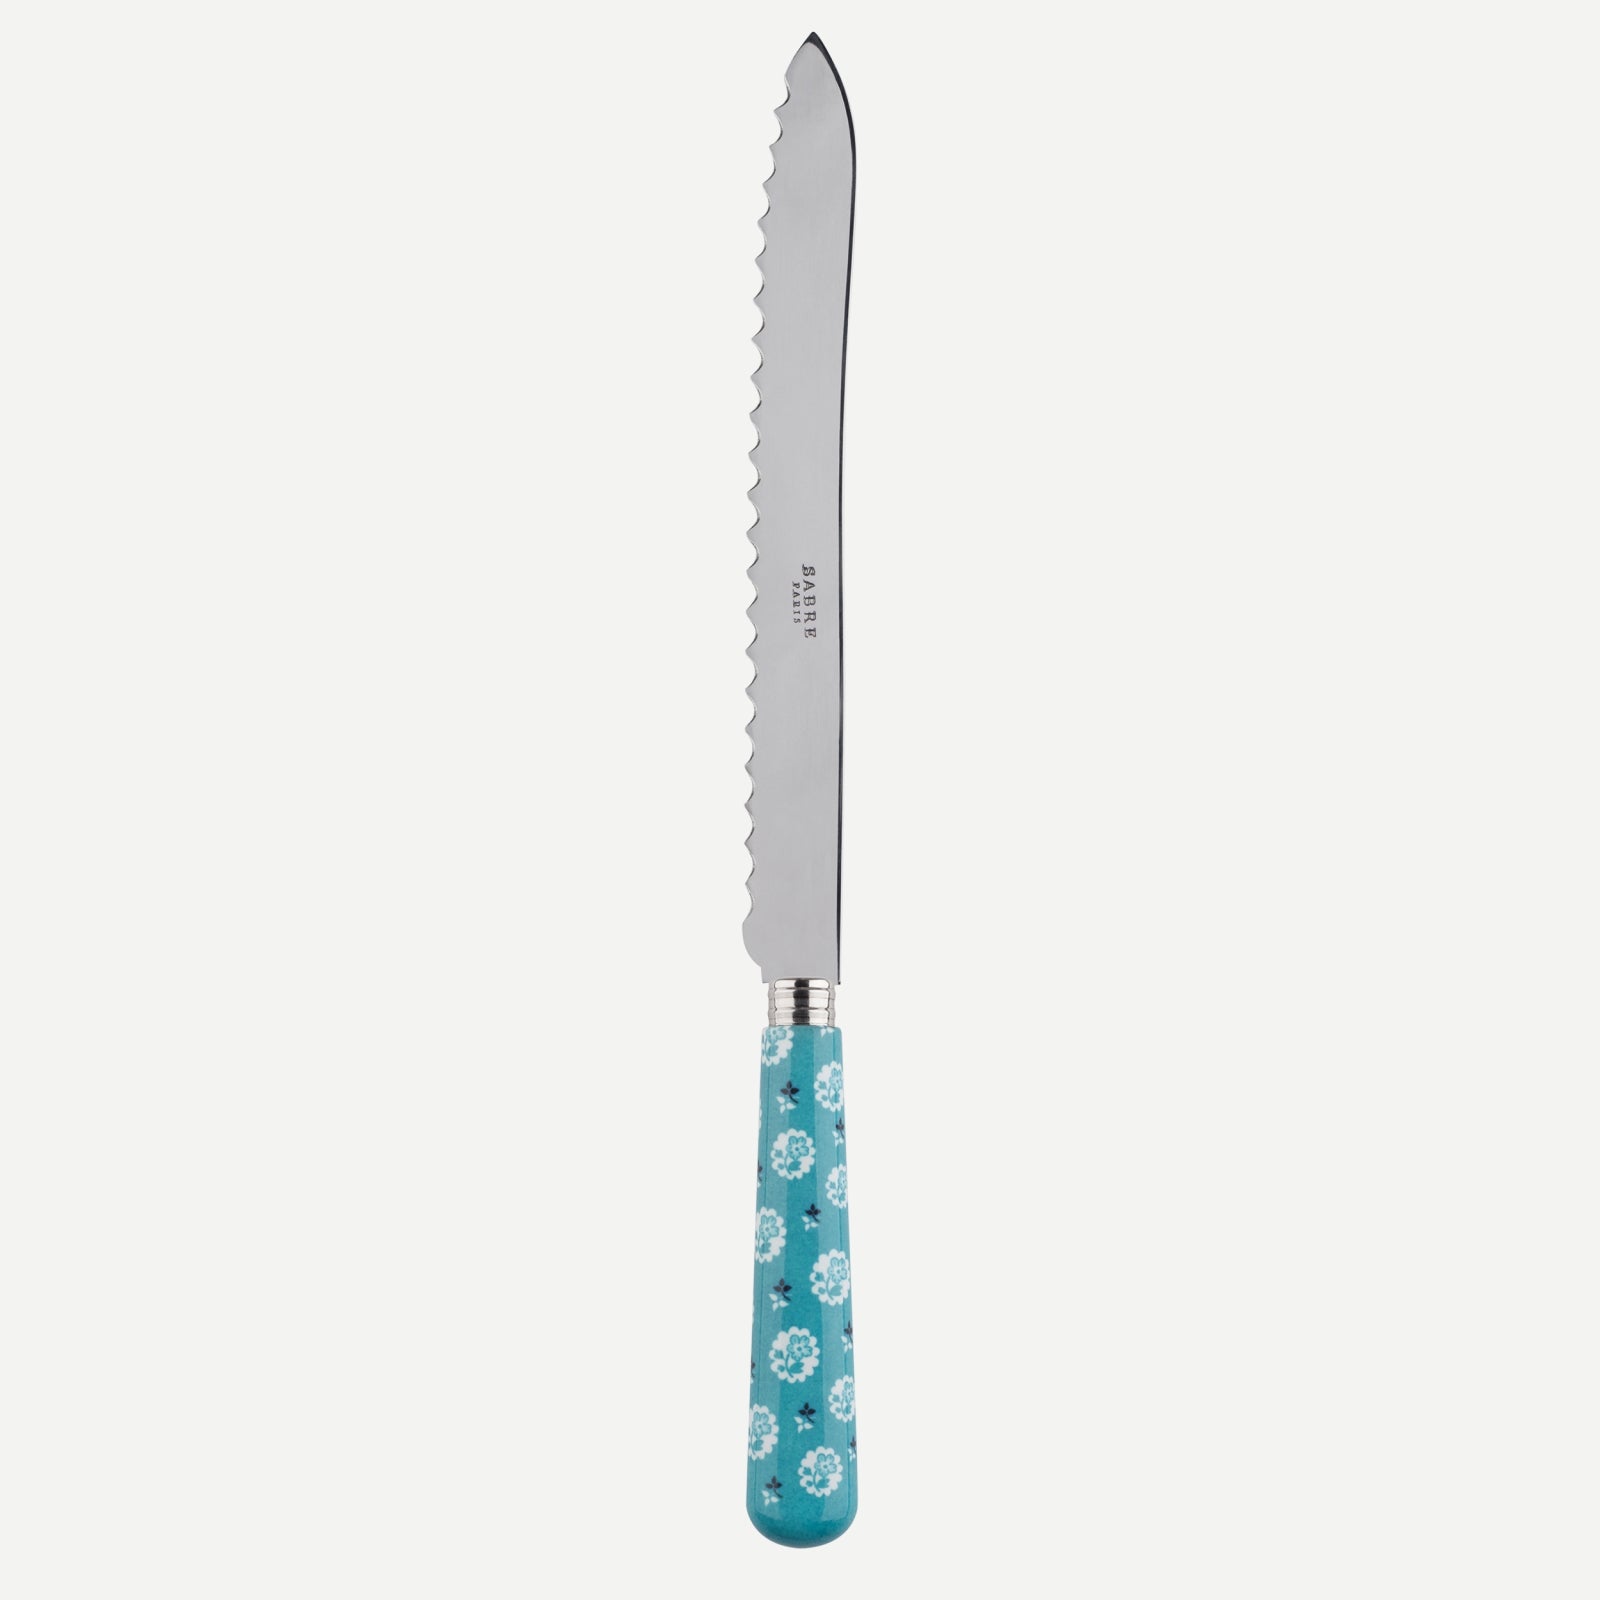 Bread knife - Provencal - Turquoise